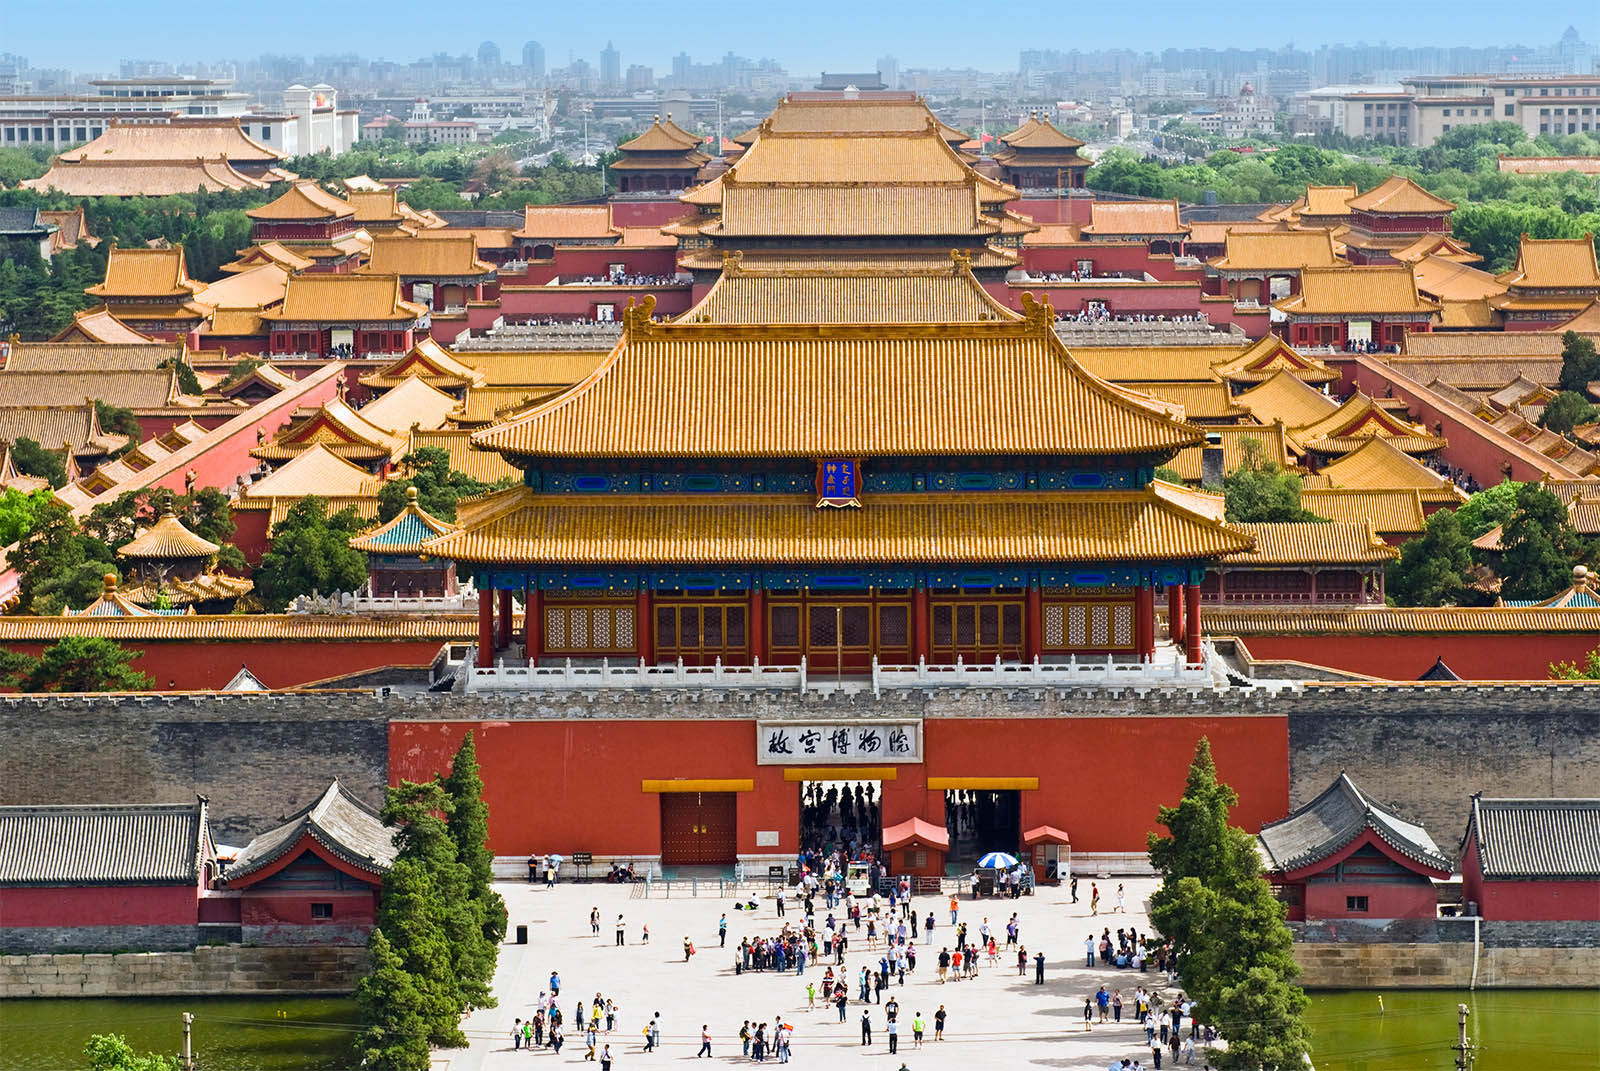 If You Can Get at Least 15 on This 20-Question World Landmarks Quiz, You Can Safely Travel the World Without Getting Lost Forbidden City, Beijing, China